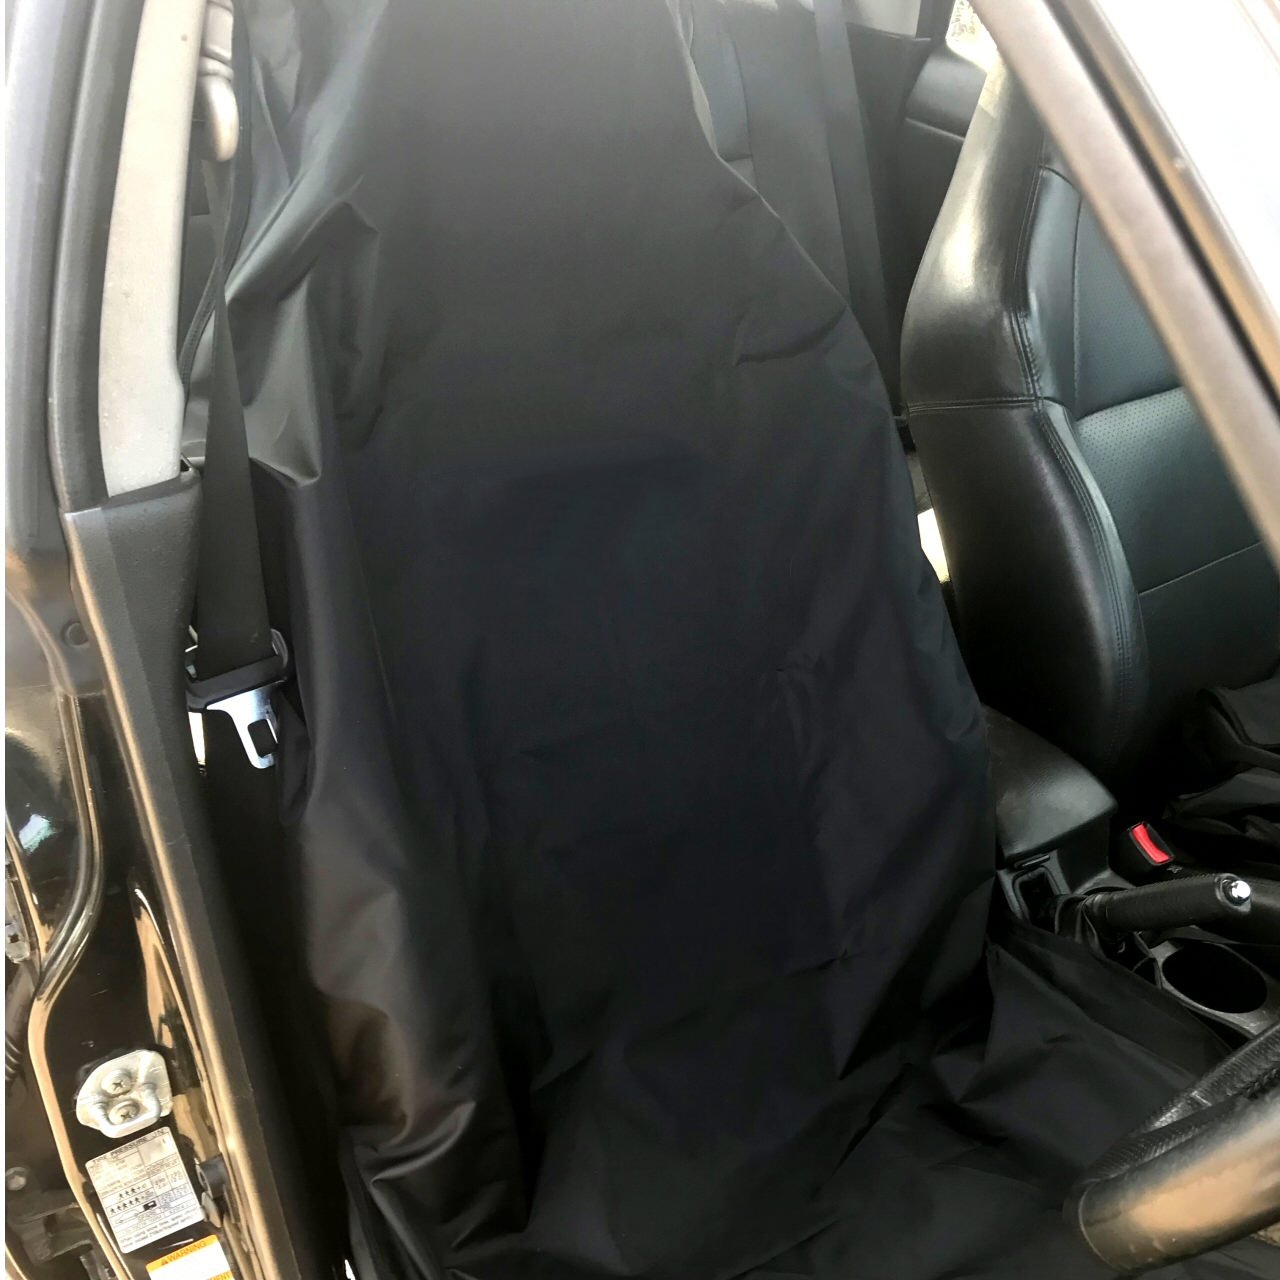 Airbag Compatible Seat Cover for Subaru Impreza, Legacy and Forester Plain Black_1